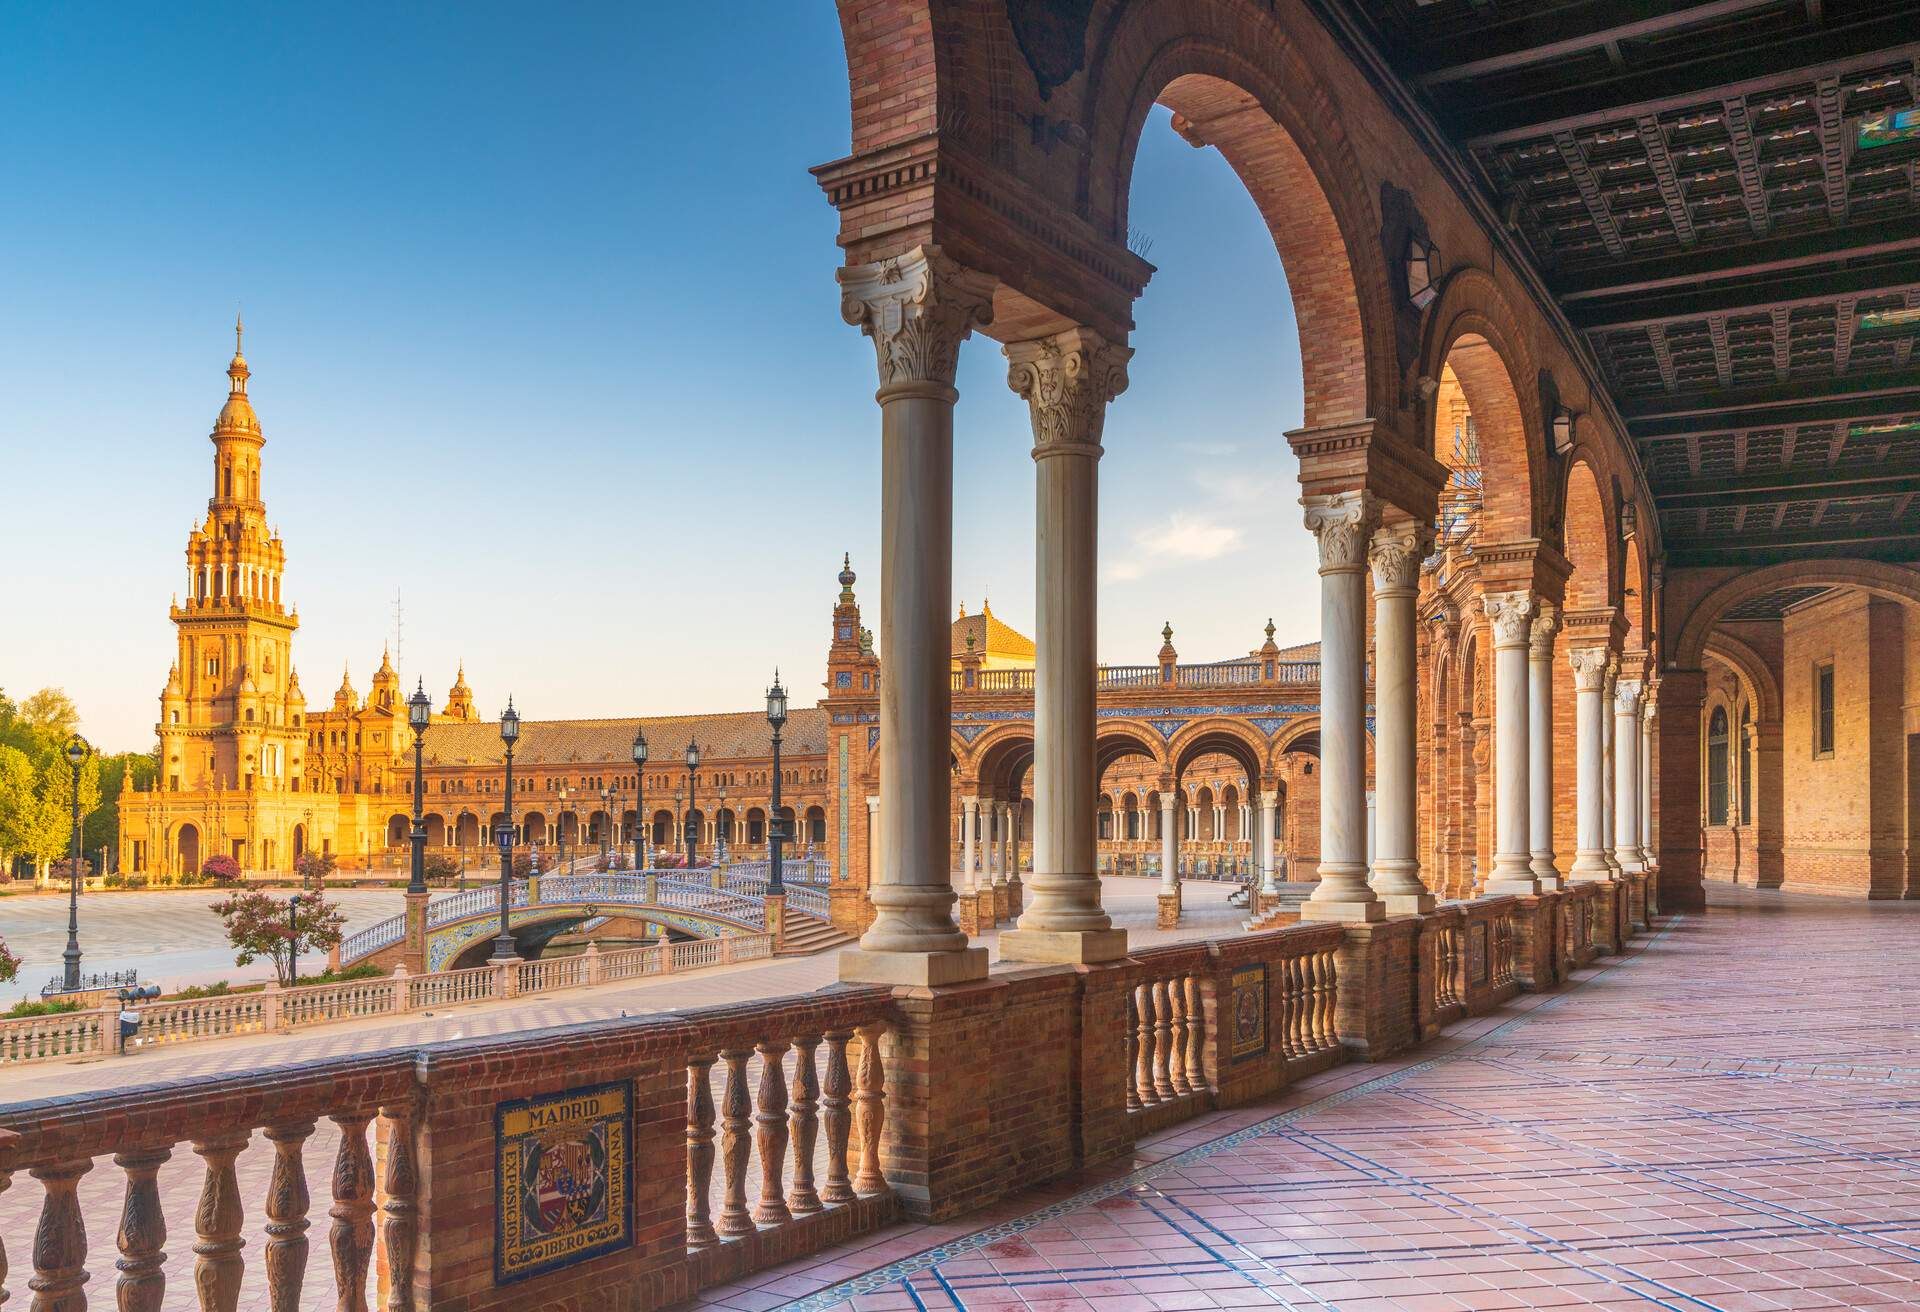 Sunrise on the old tower seen from colonnade of the semi-circular portico, Plaza de Espana, Seville, Andalusia, Spain